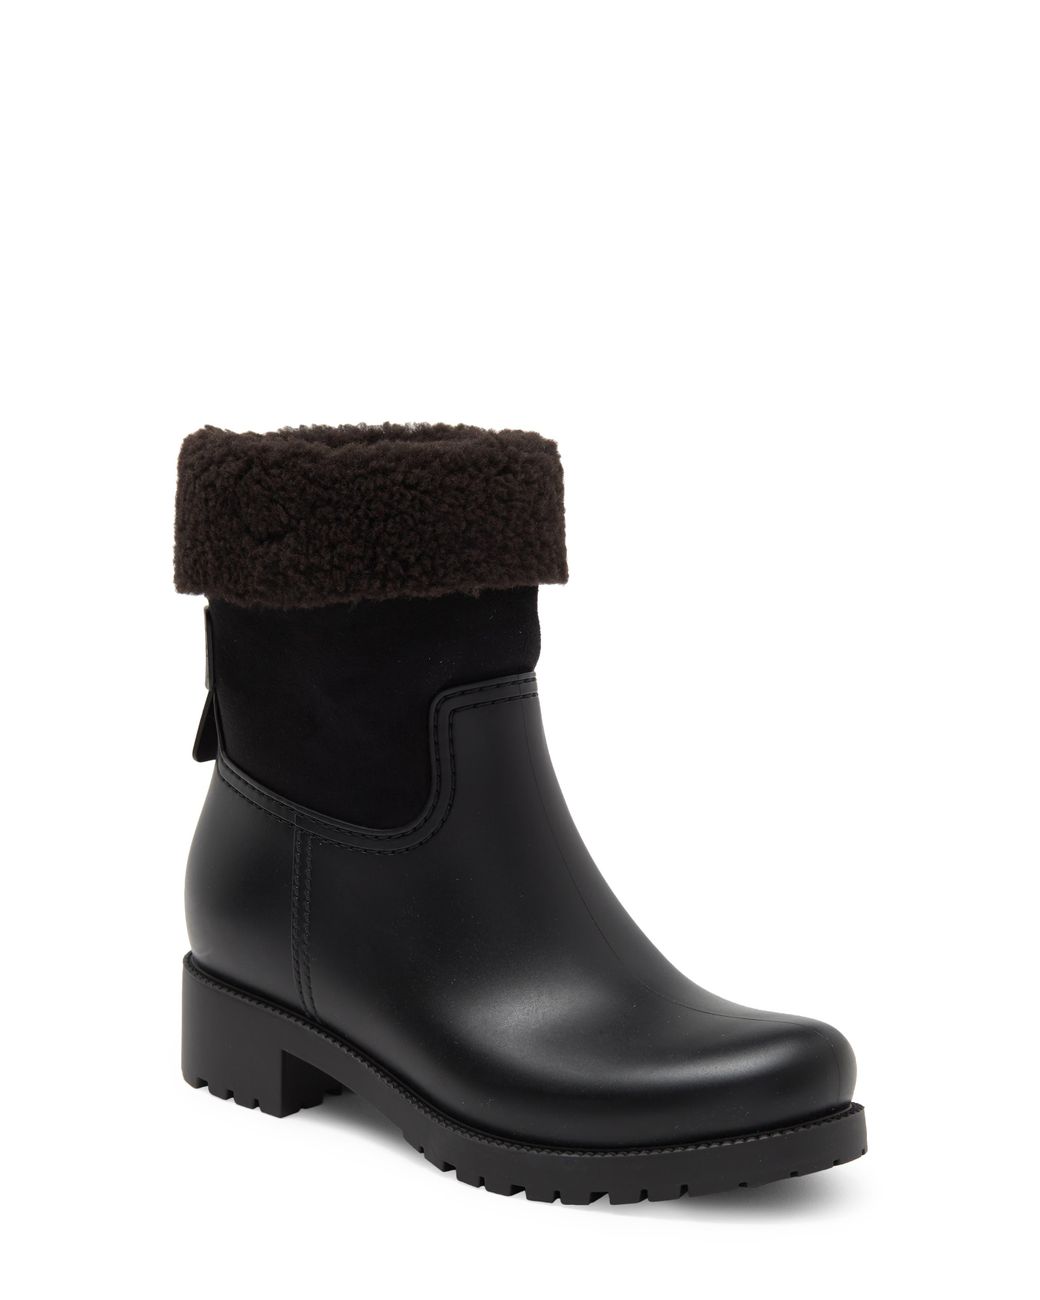 See By Chloé Genuine Shearling Lined Boot in Black | Lyst